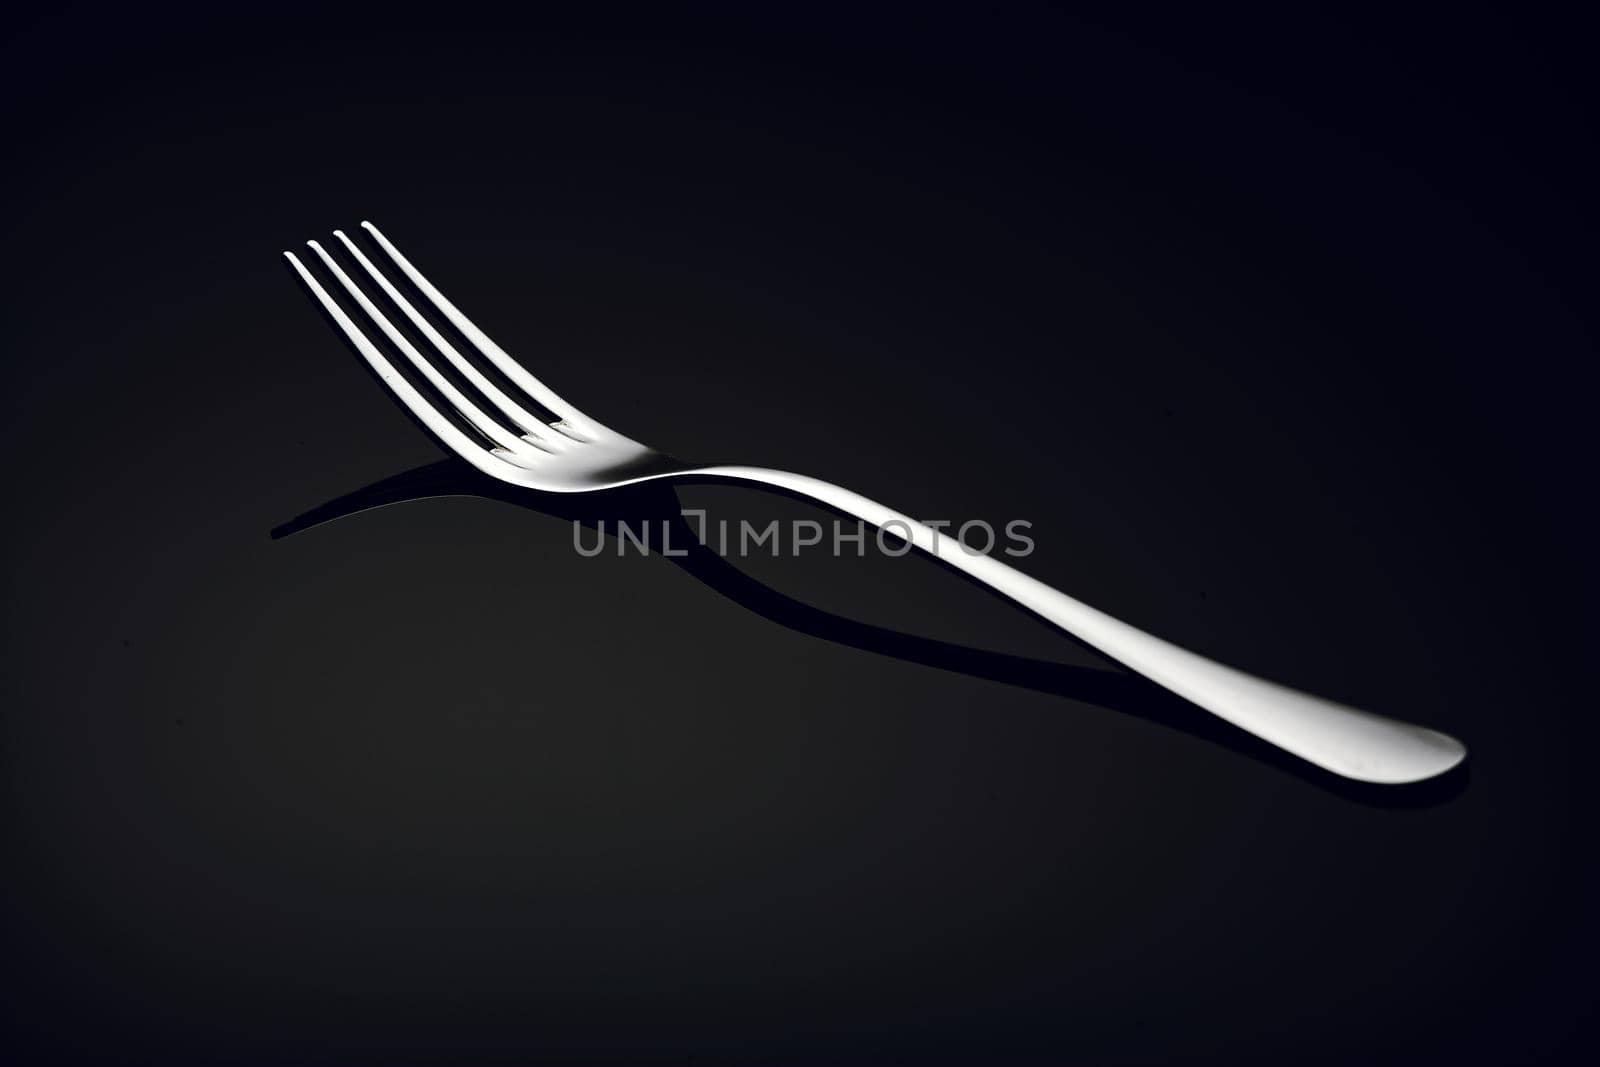 A white metal fork lies on a black glass with a reflection. A simple kitchen item for advertising.